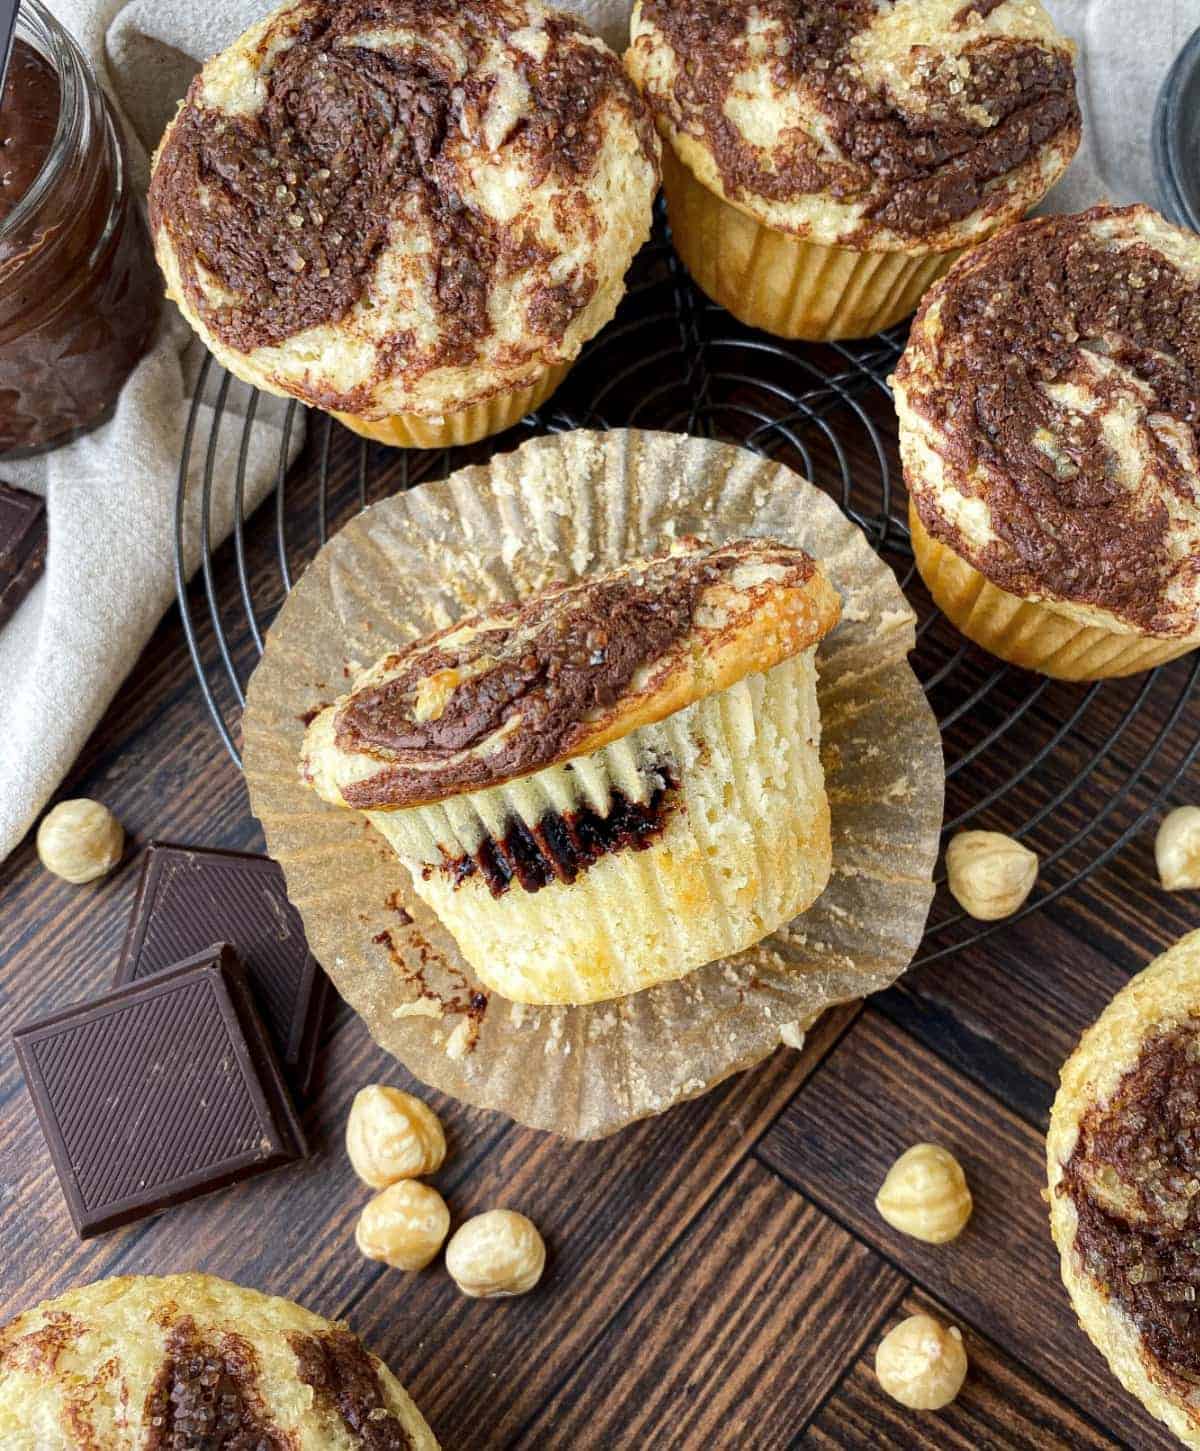 Top view of Nutella Muffins with hazelnuts and chocolate nearby.